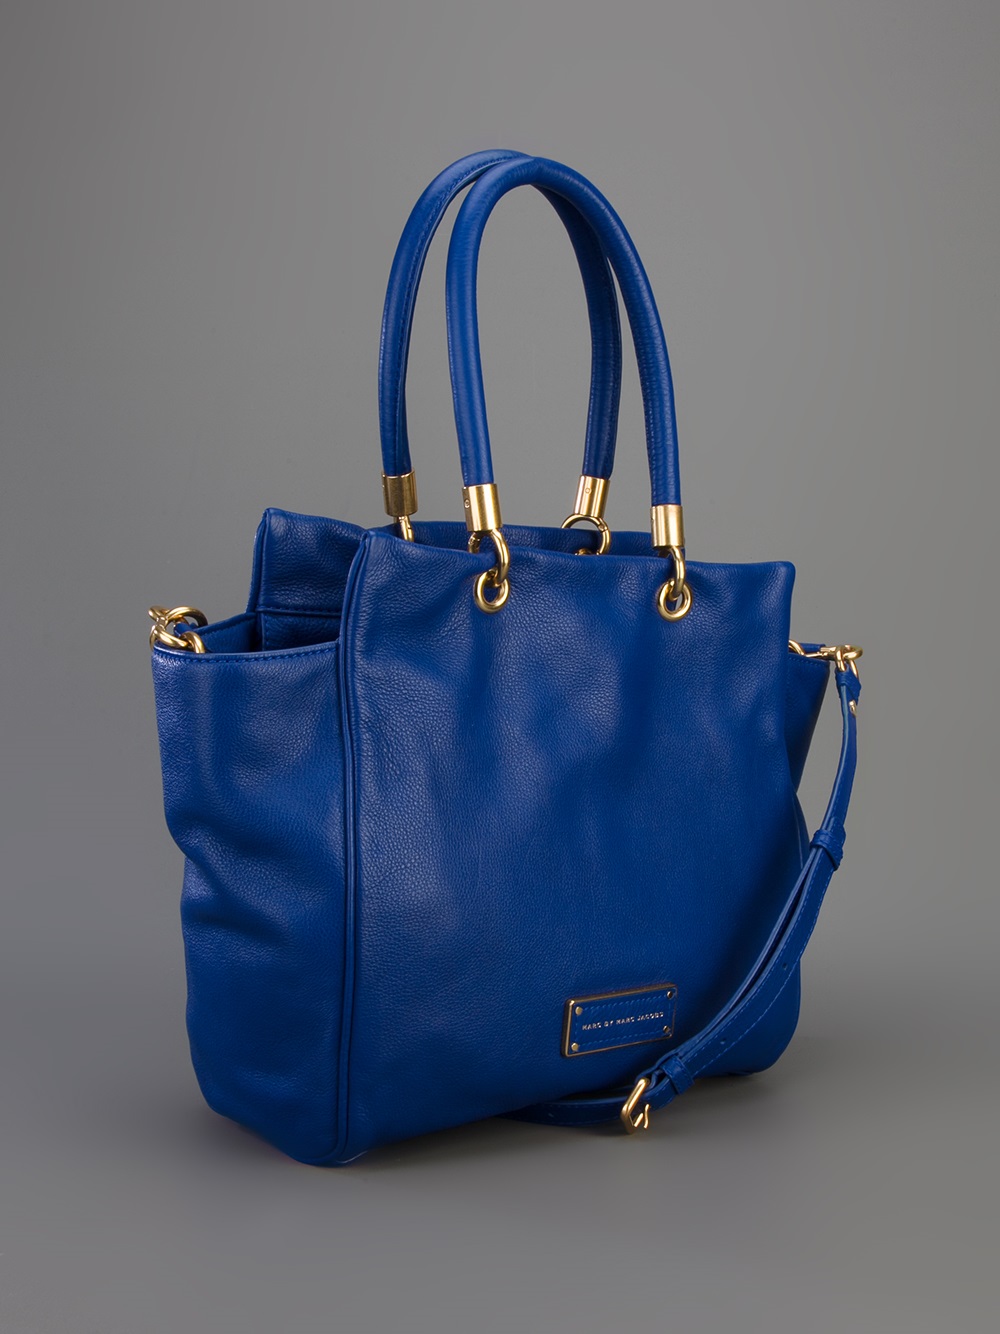 Lyst - Marc By Marc Jacobs Too Hot To Handle Bentley Tote in Blue